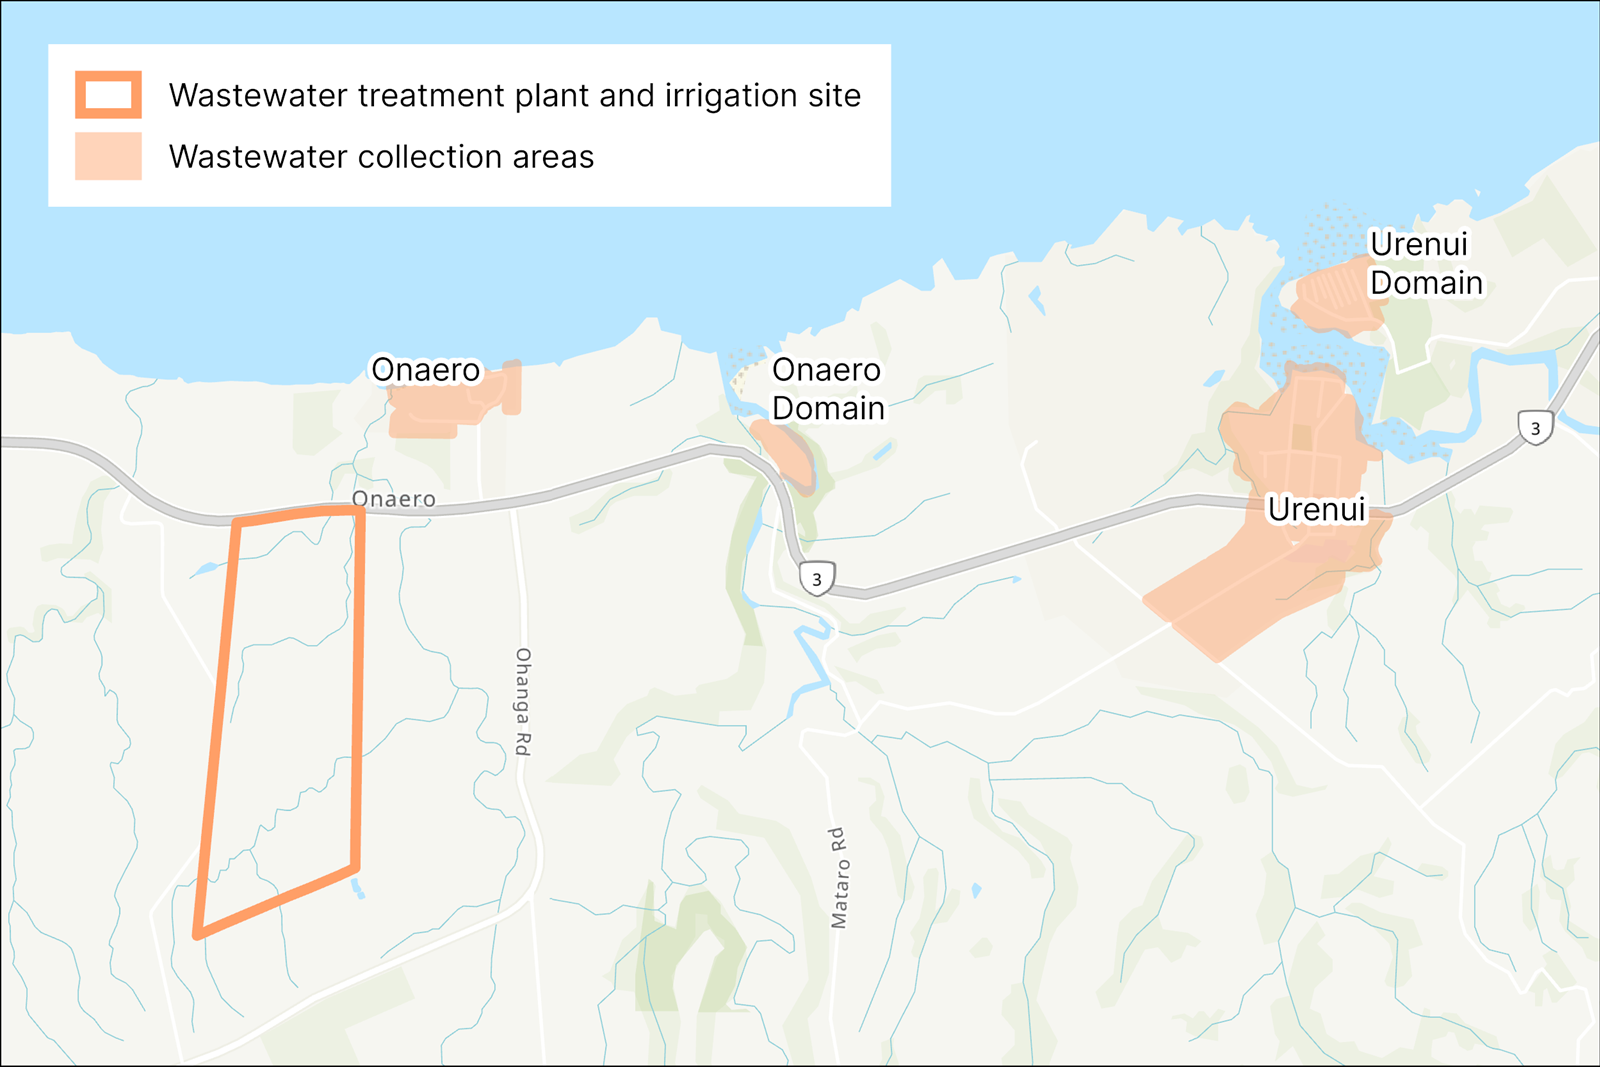 Map showing wastewater collection and treatment areas.